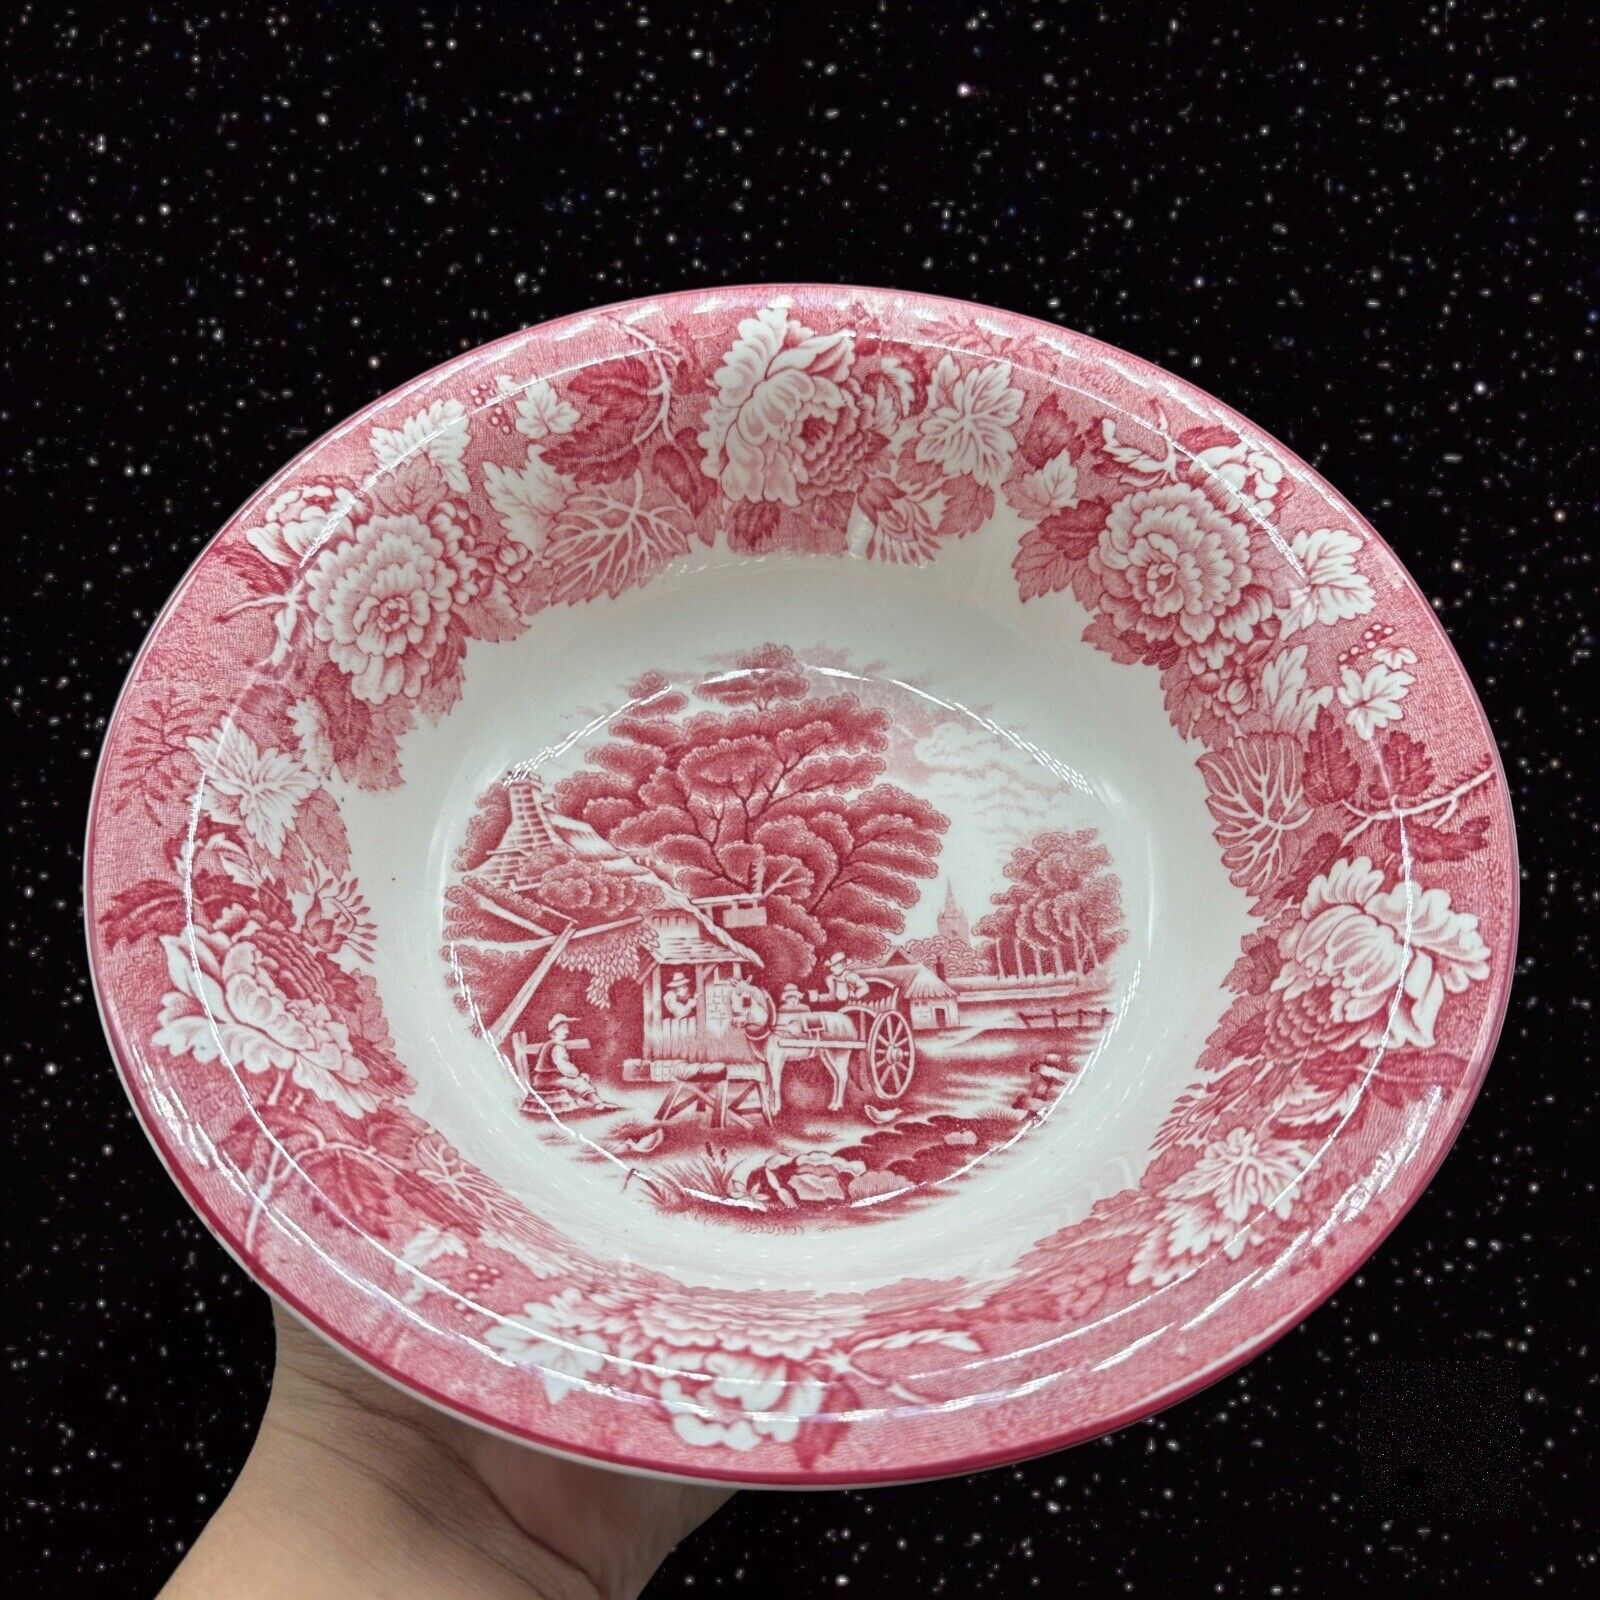 Enoch Woods Ware English Scenery Red Transfer Ware Luncheon Bowl Ceramic 9”Wide